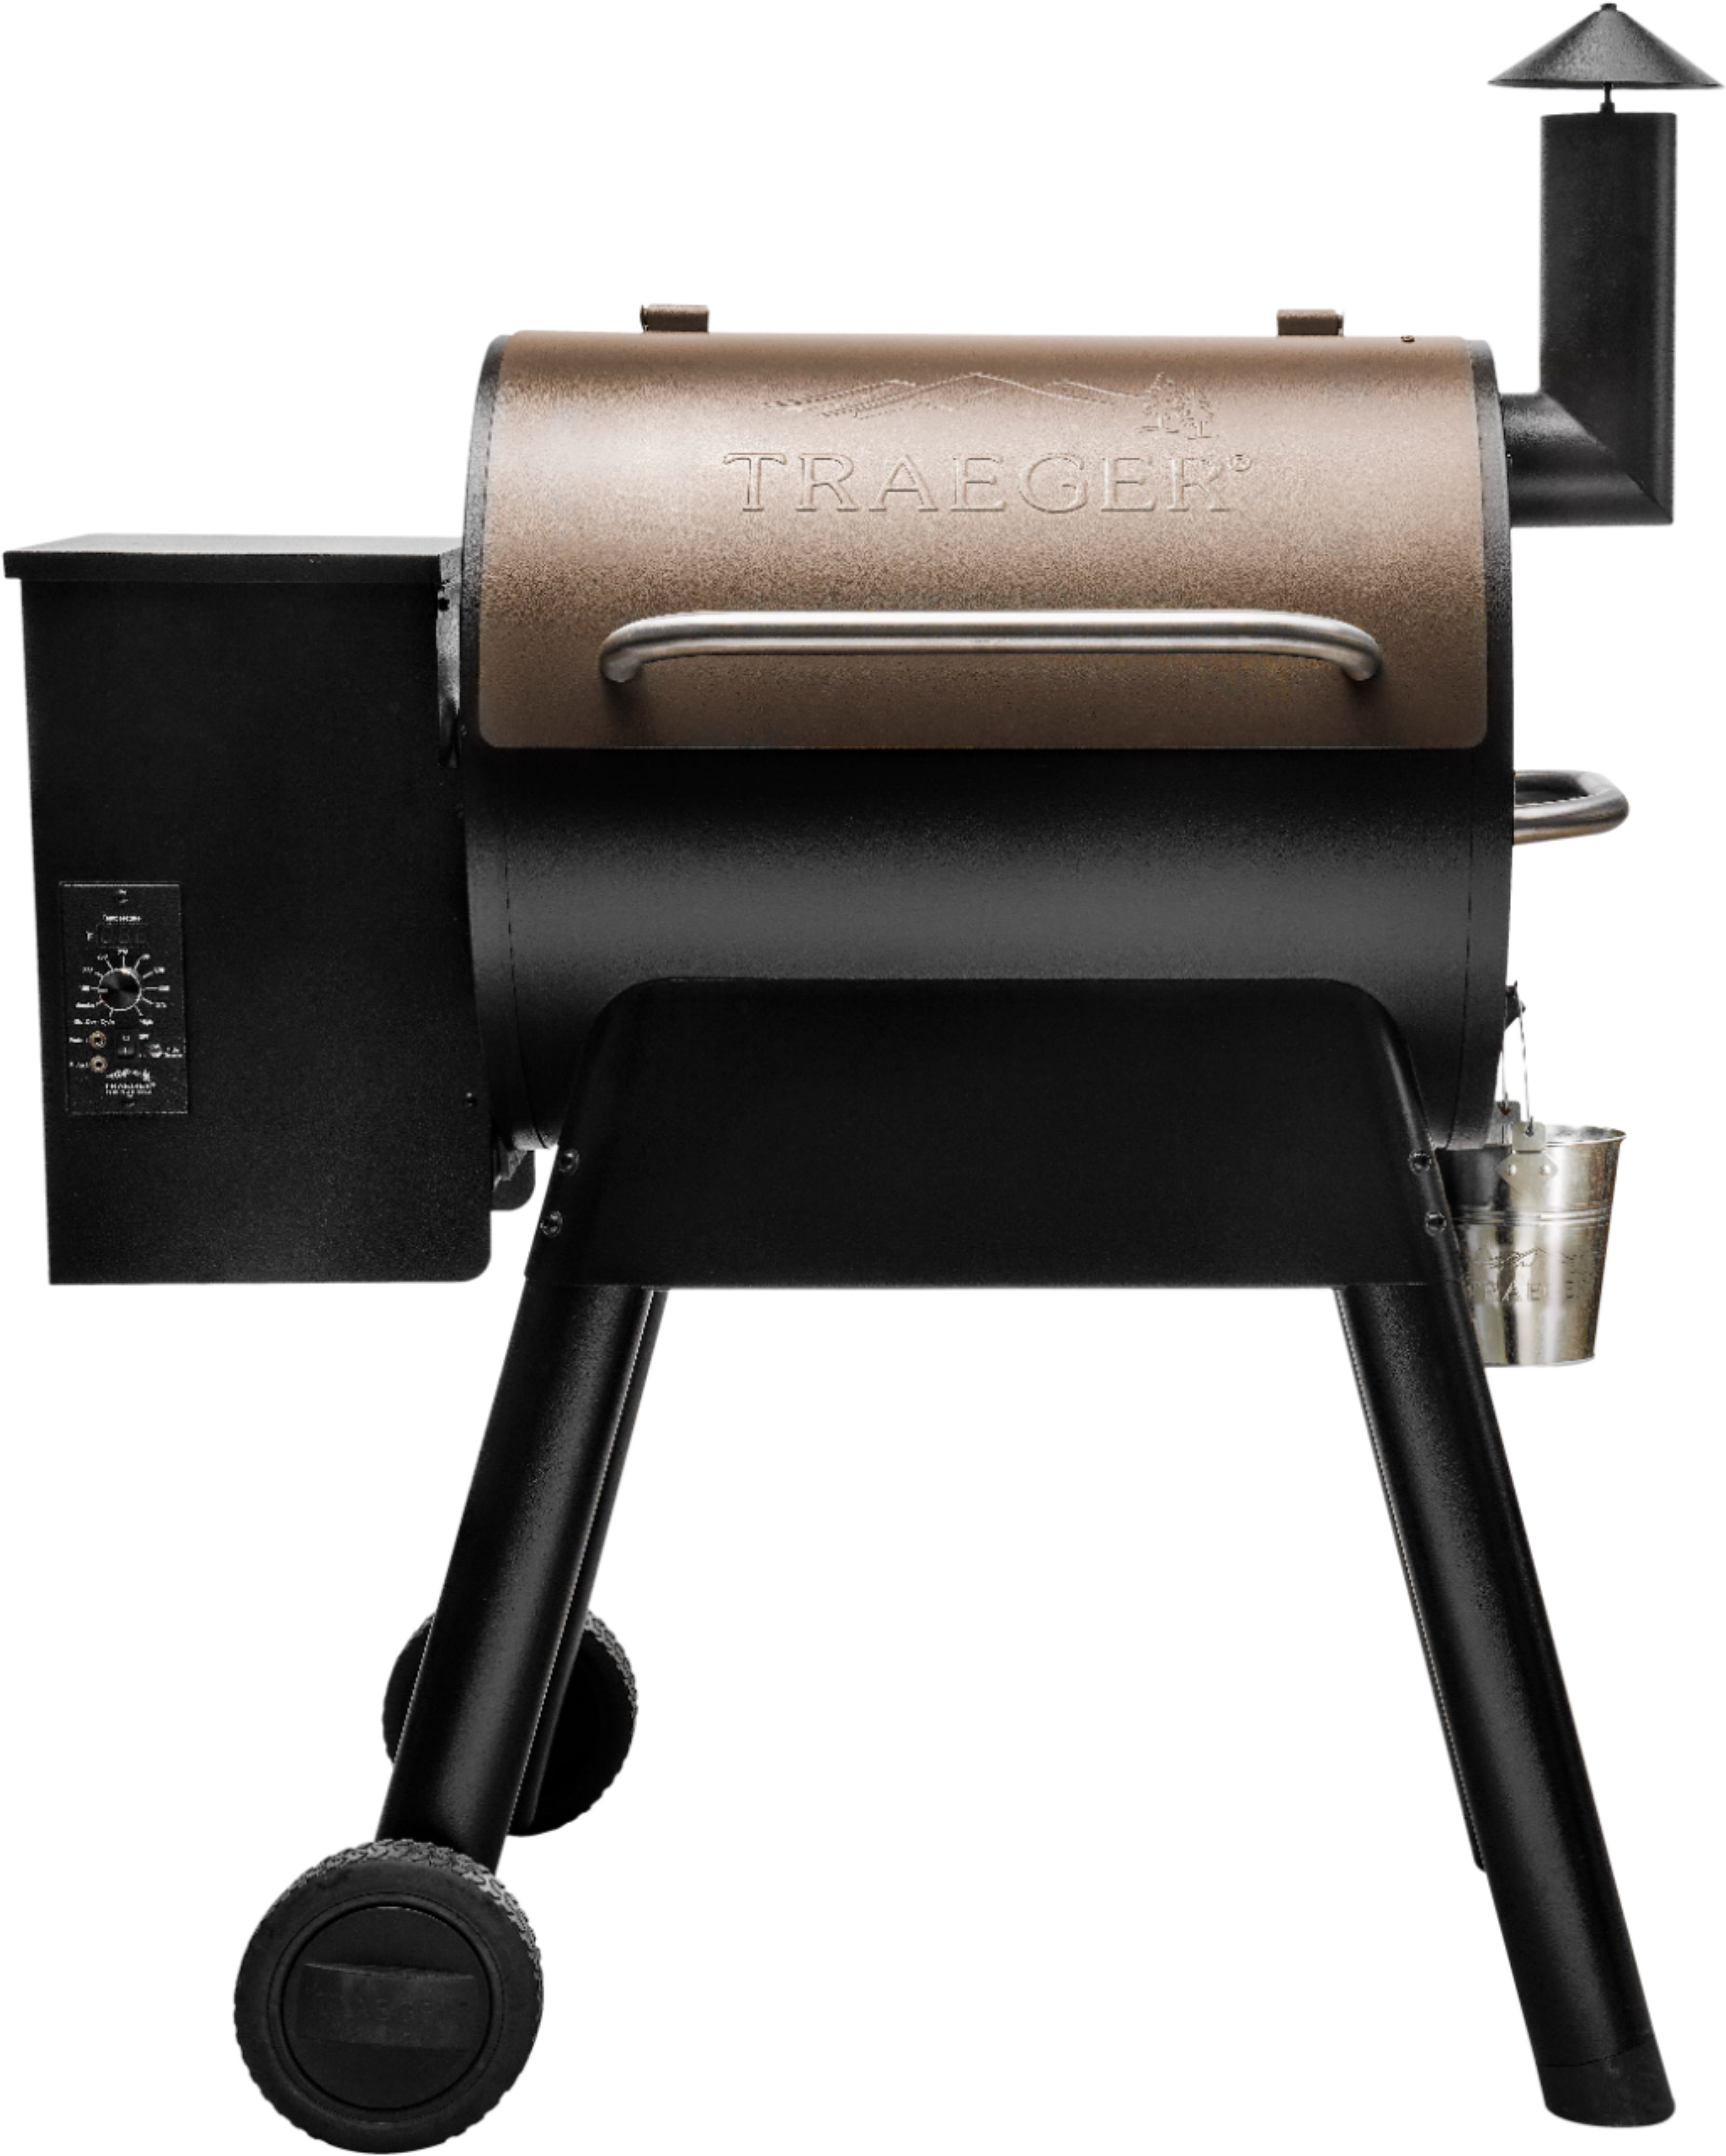 IV. Online Retailers for Buying Traeger Grills